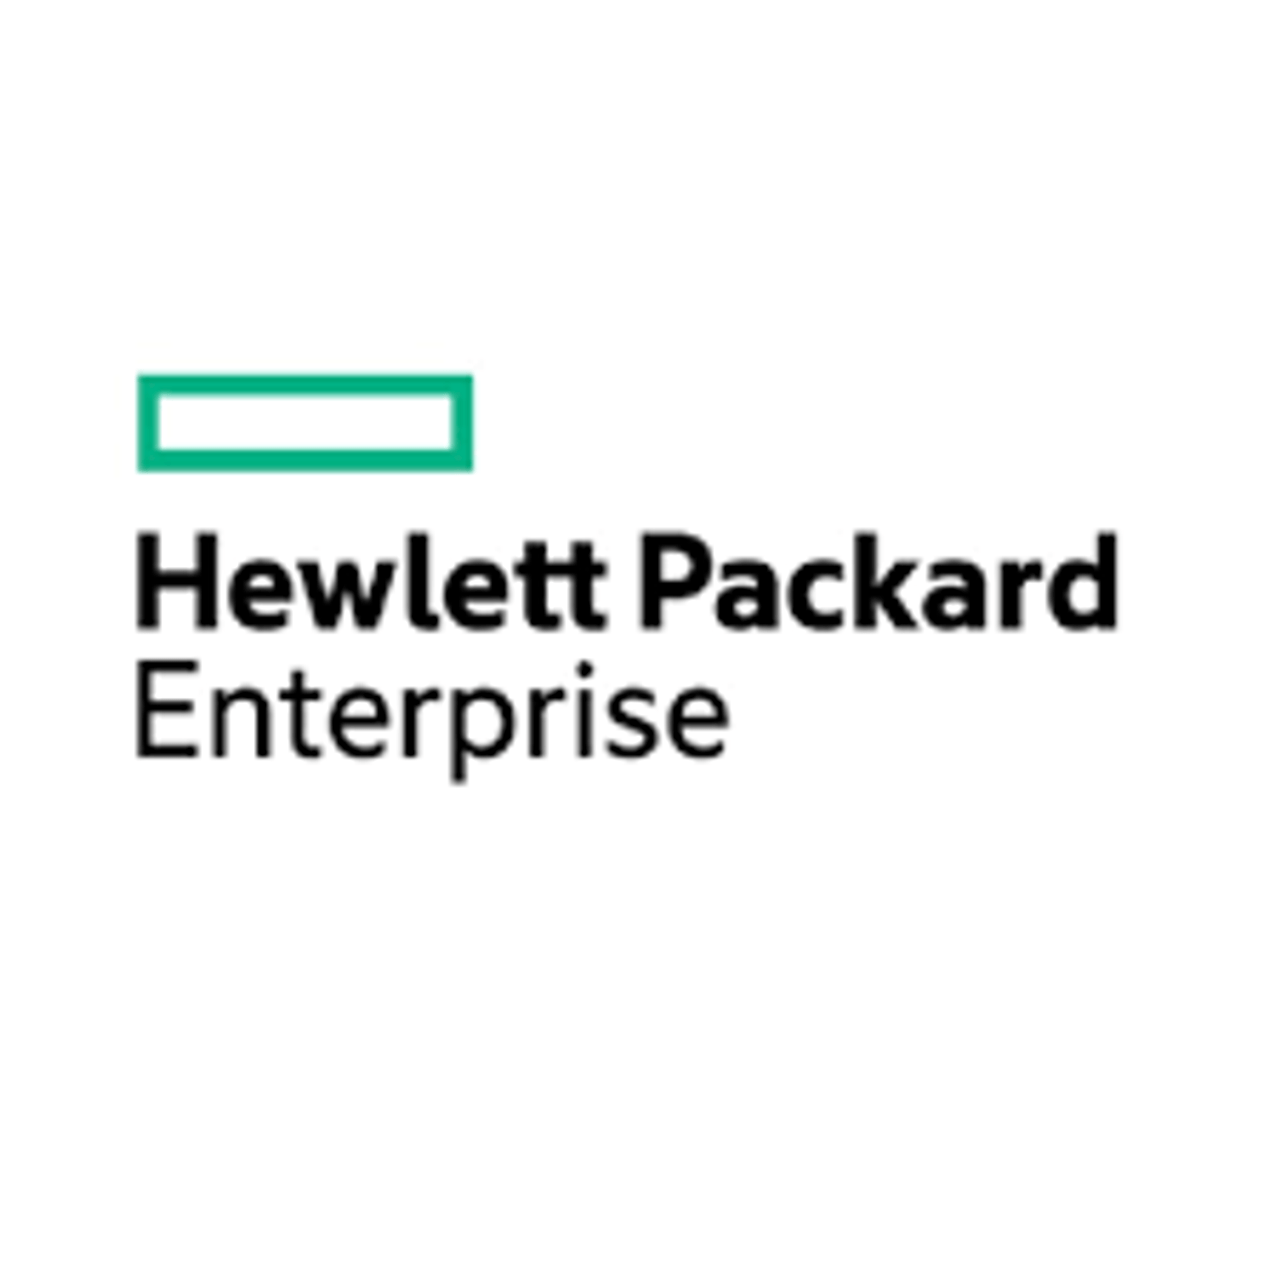 HPE Ed SimpliVity Overview Training